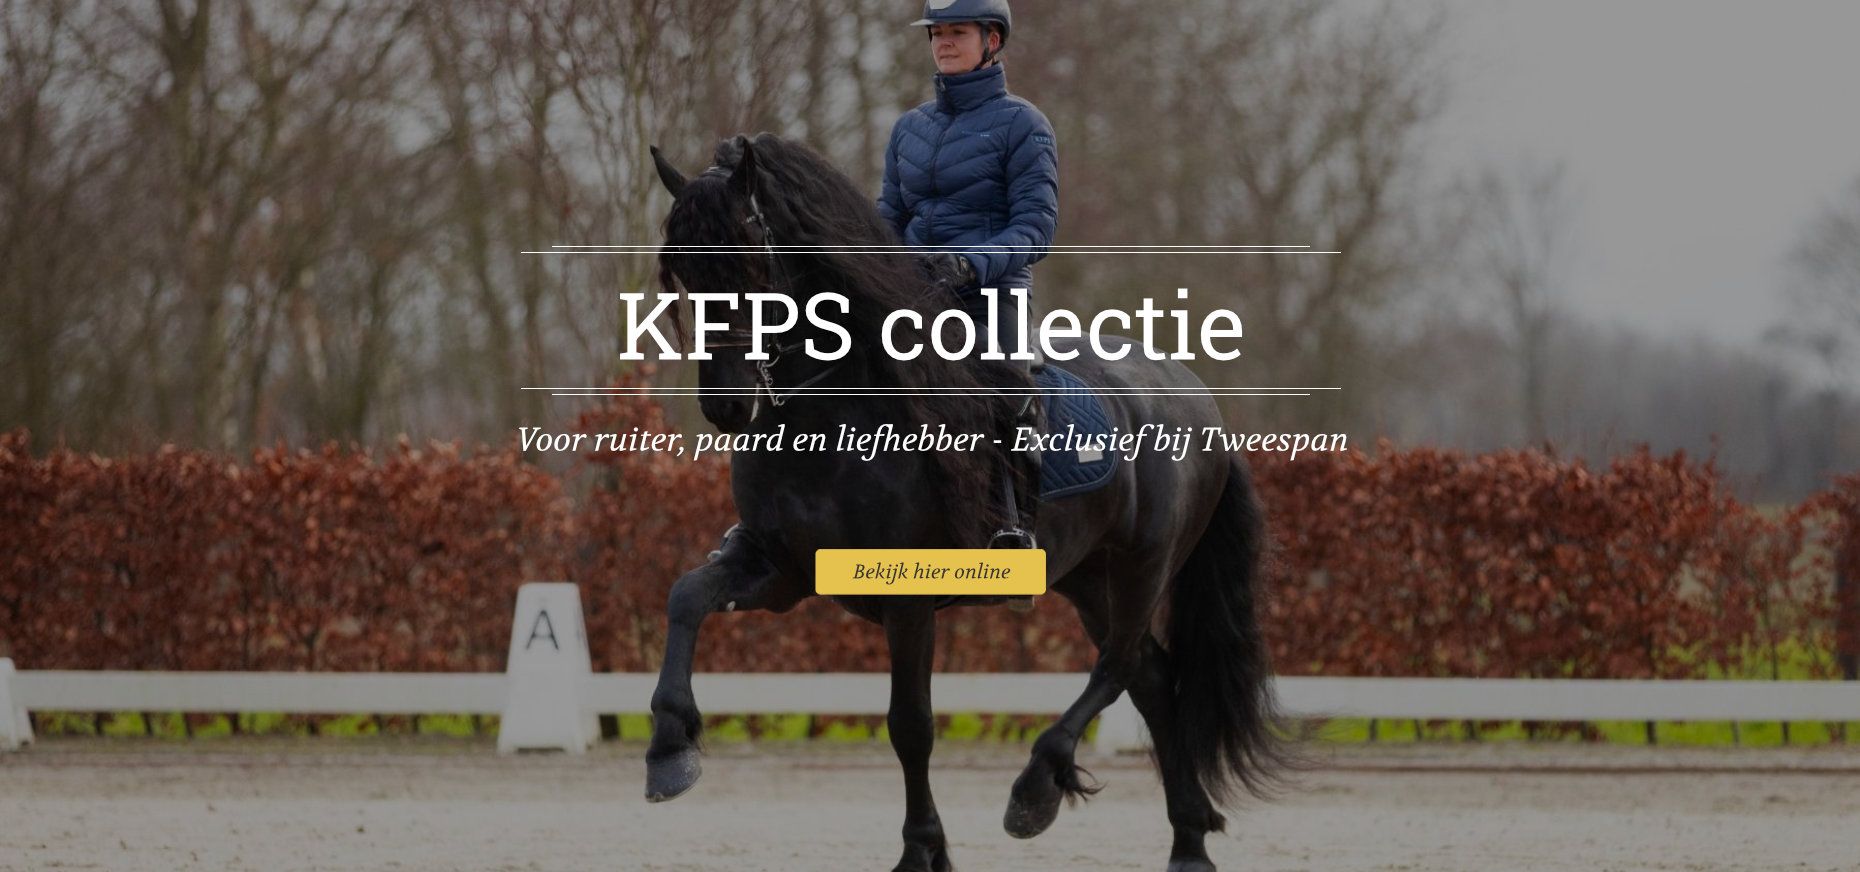 KFPS collectie